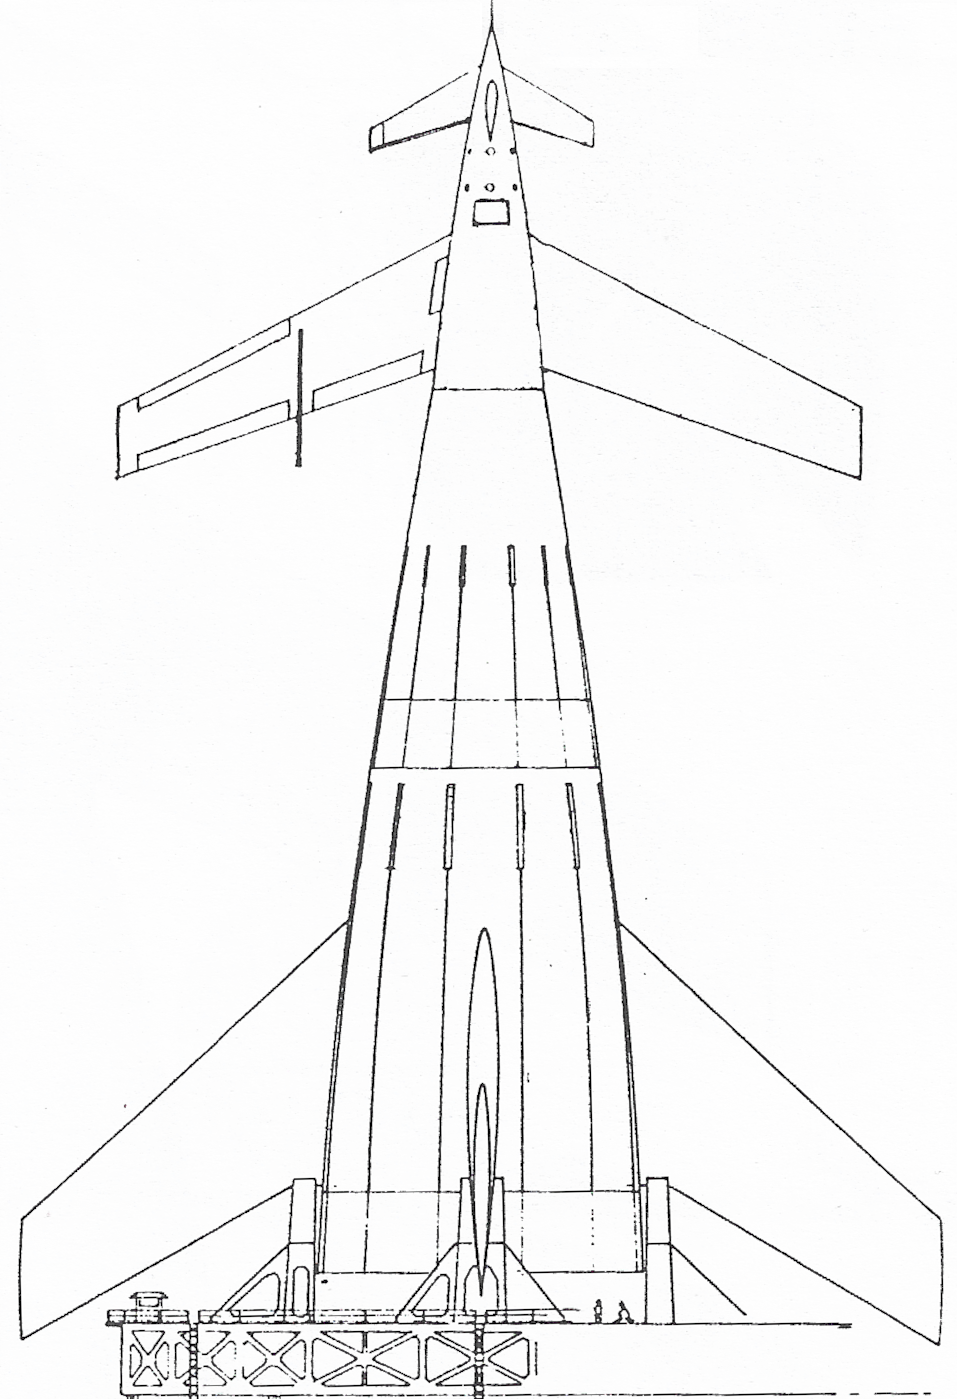 launch vehicle plan form line drawing